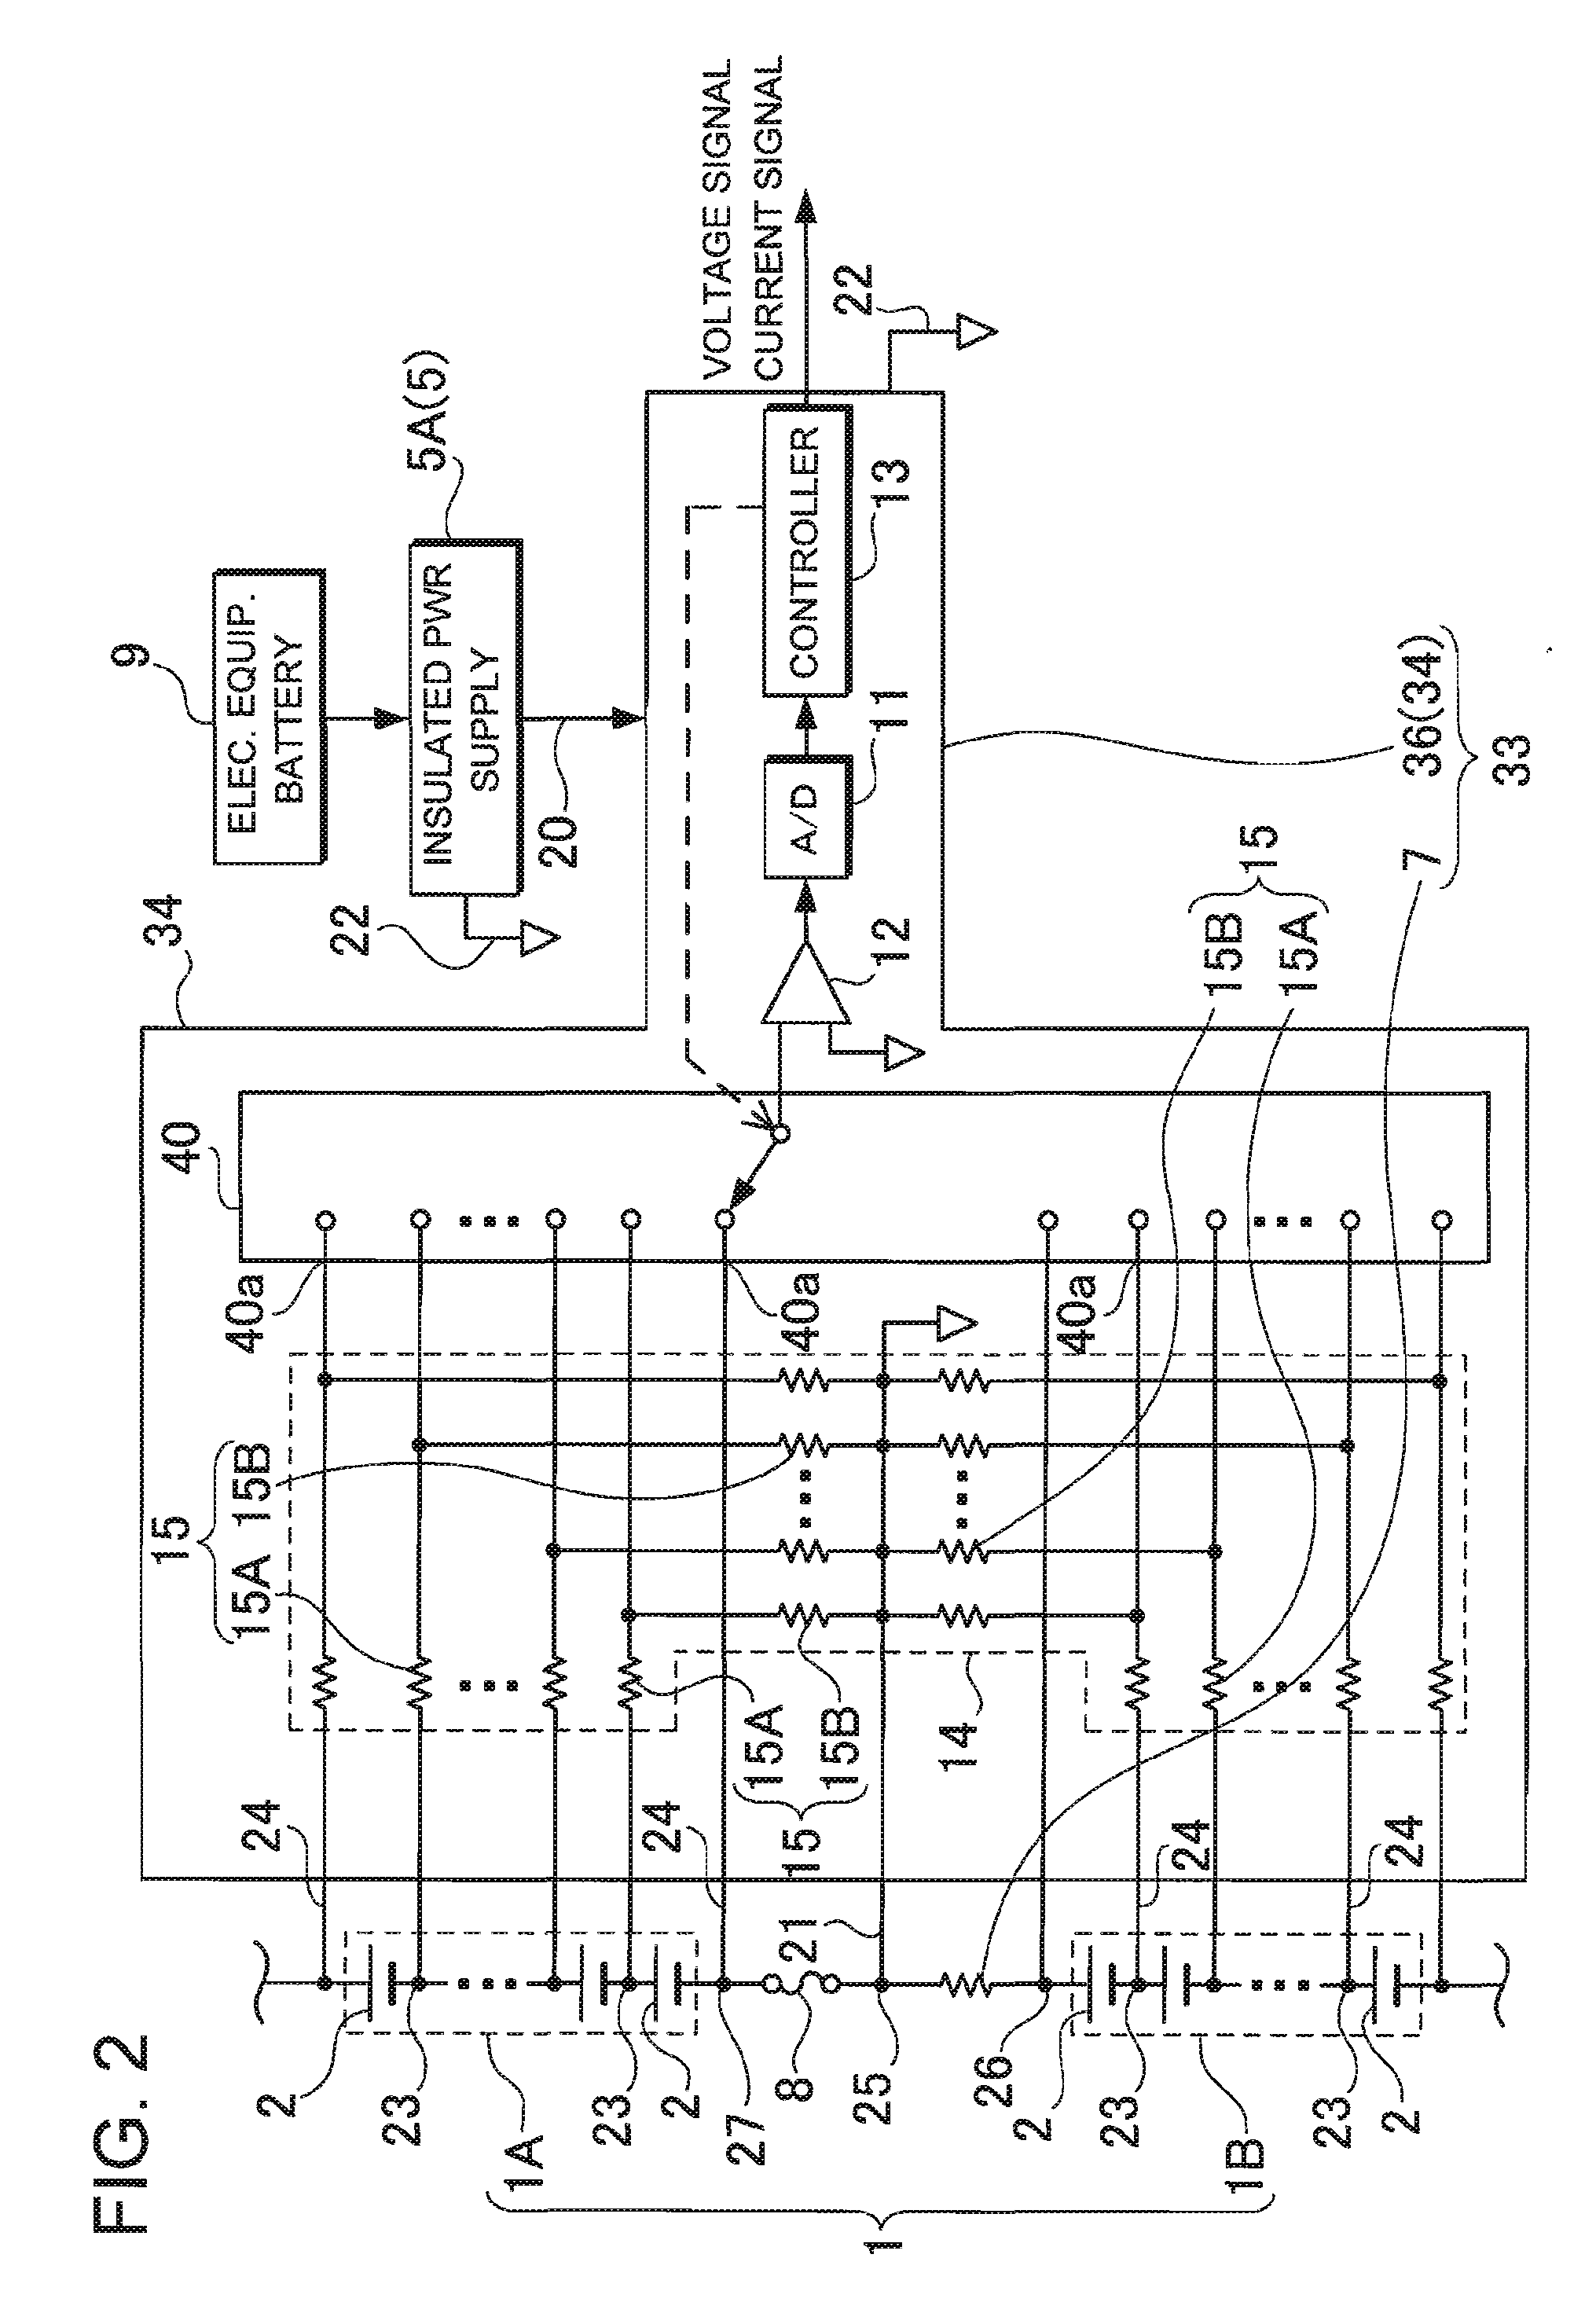 Vehicle power supply device